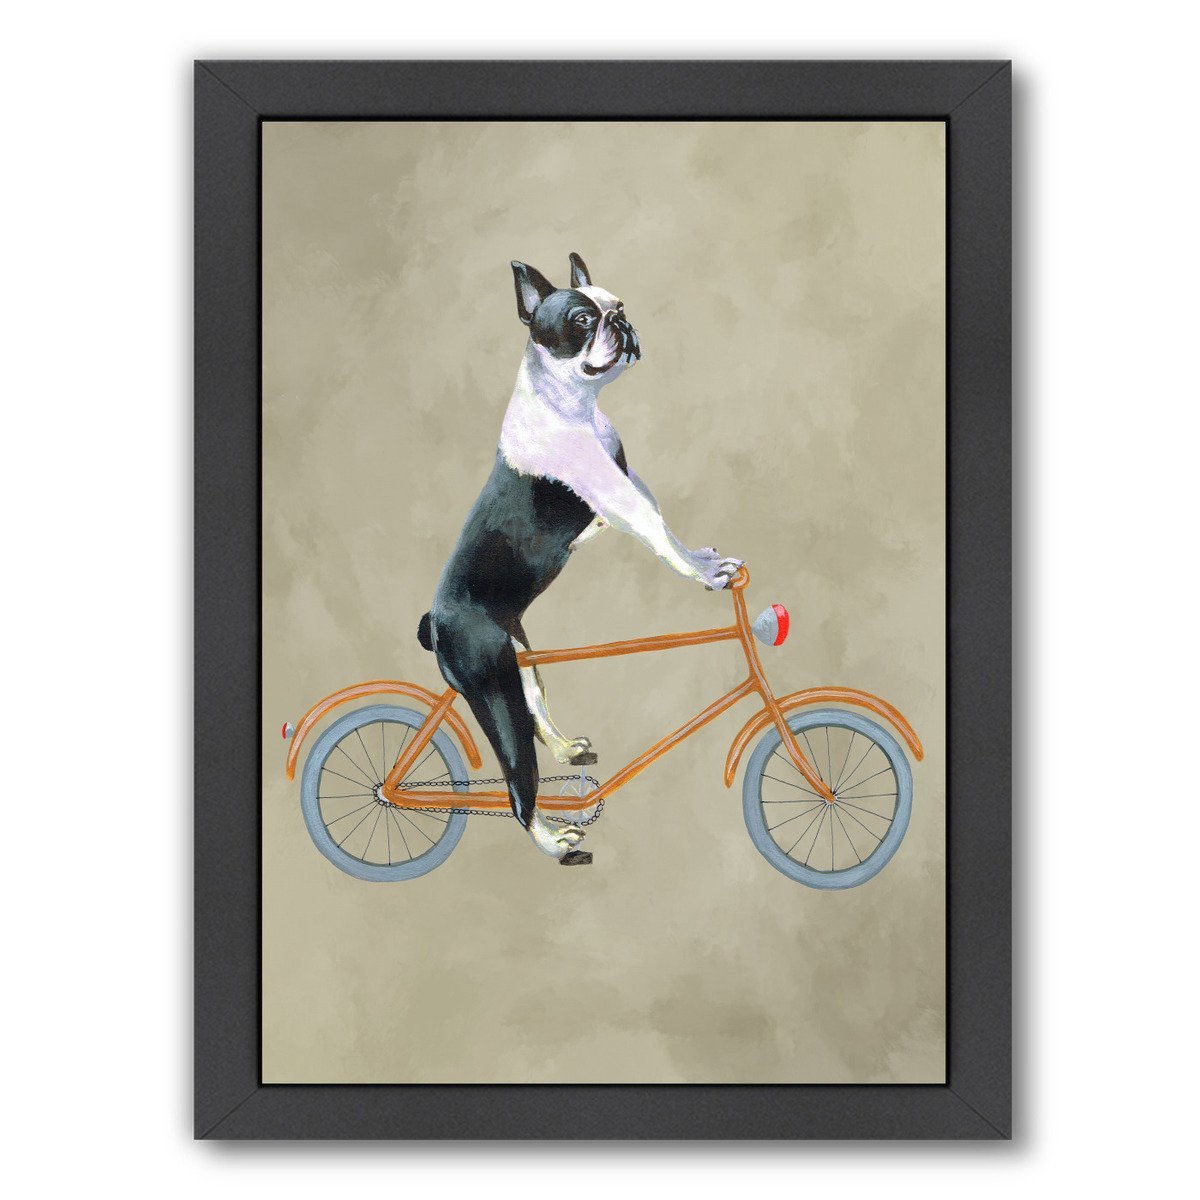 Boston Terrier On Bicycle By Coco De Paris - Black Framed Print - Wall Art - Americanflat